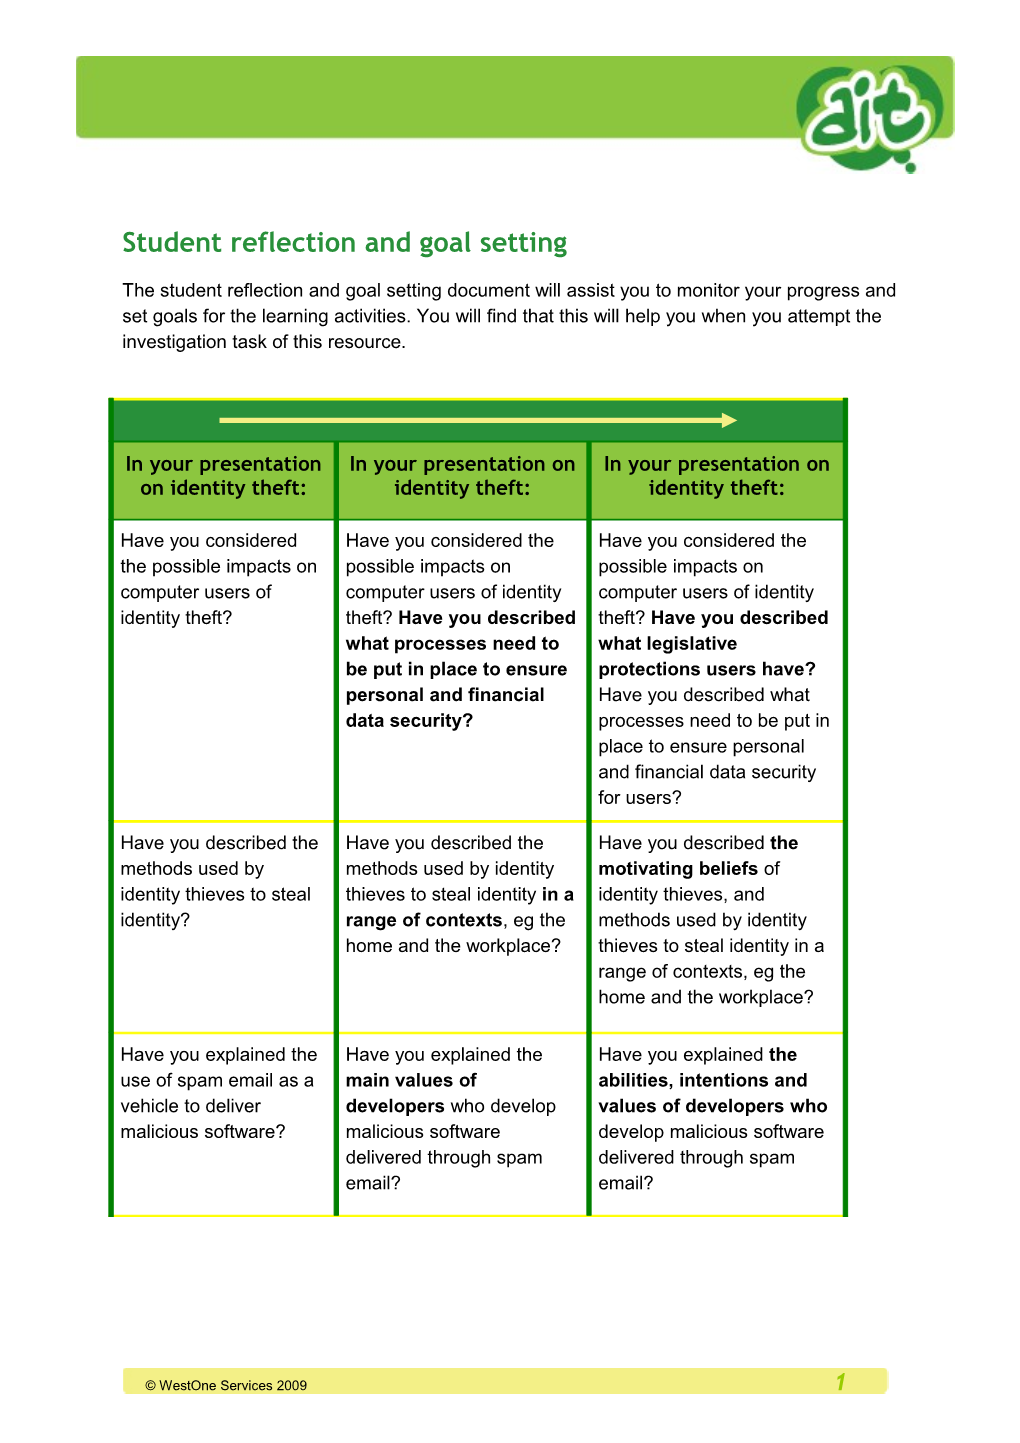 Student Reflection and Goal Setting